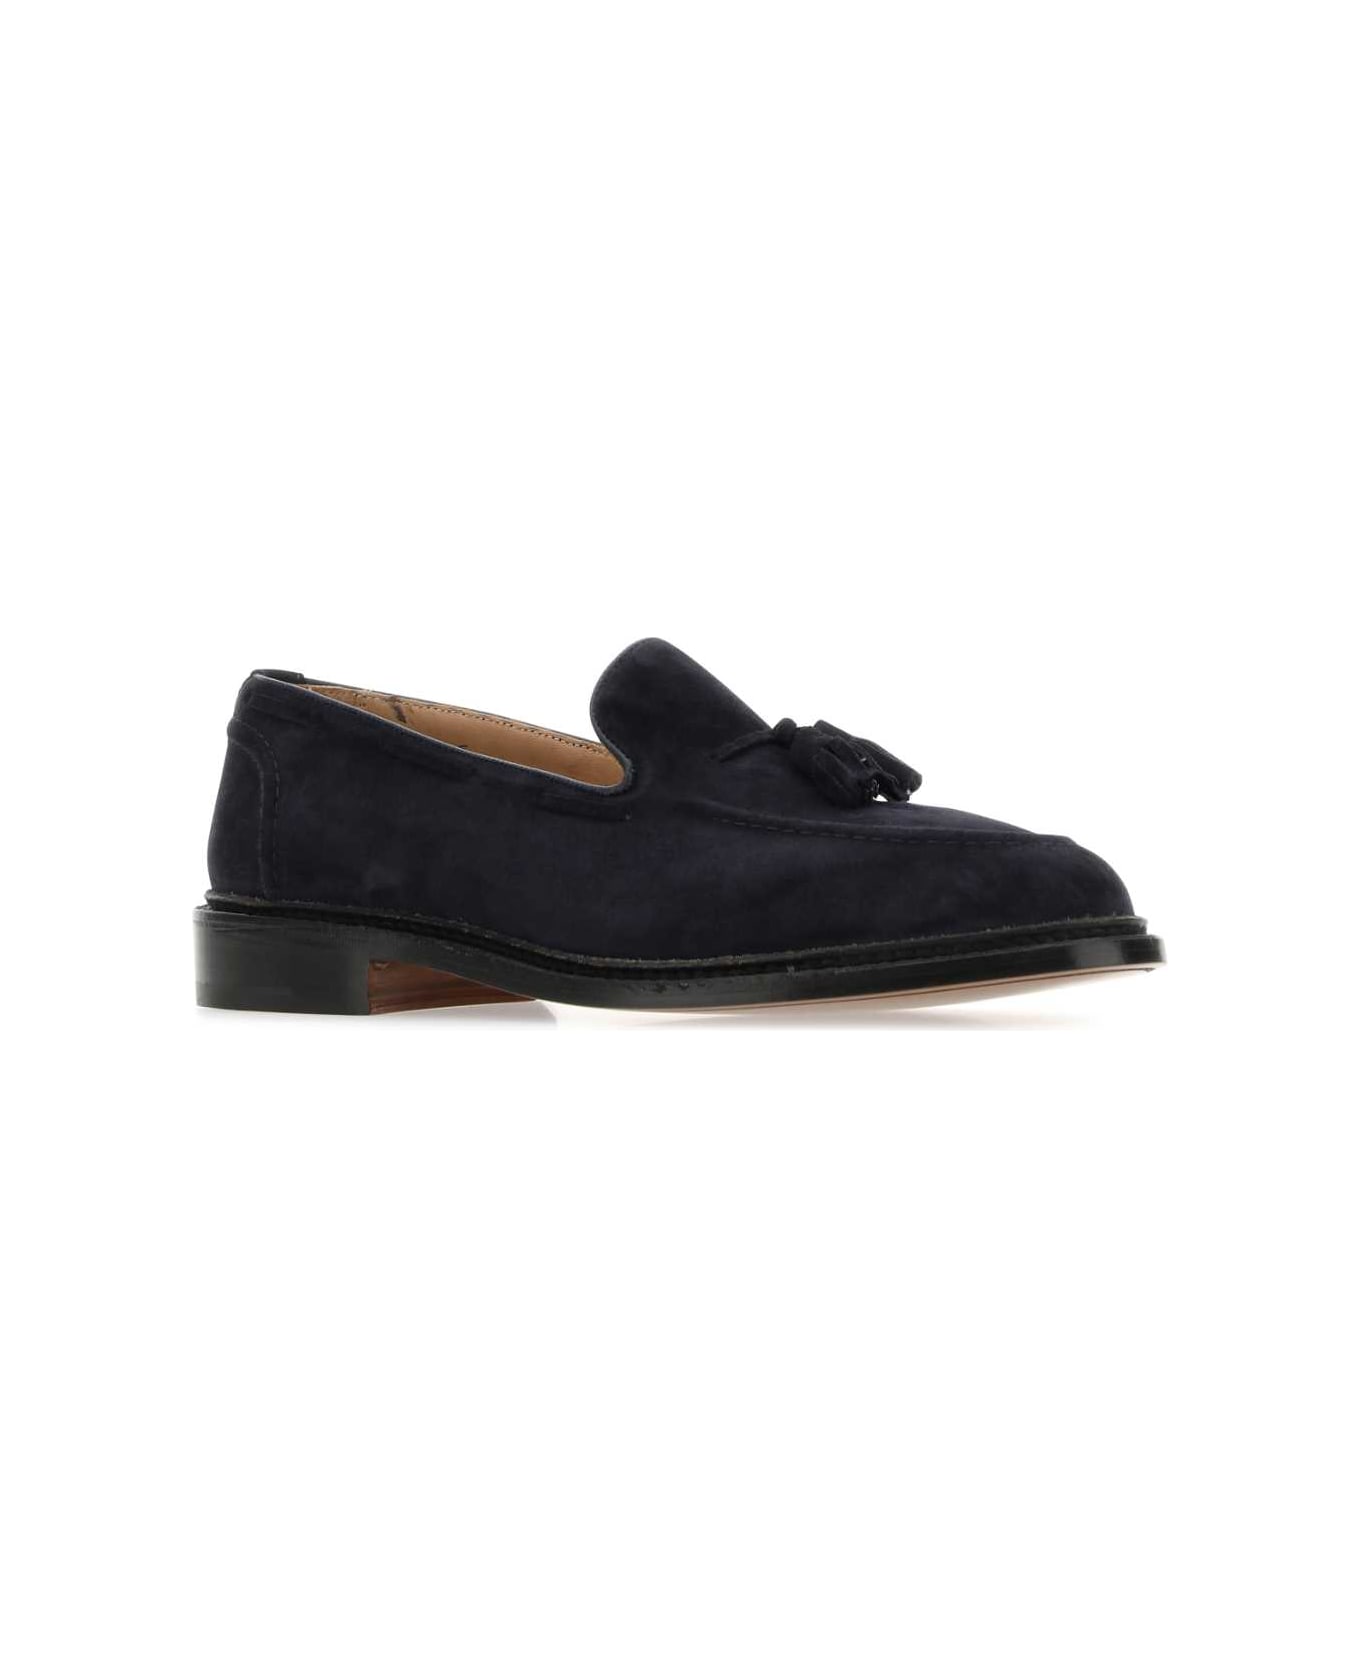 Tricker's Navy Blue Suede Elton Loafers - NAVY